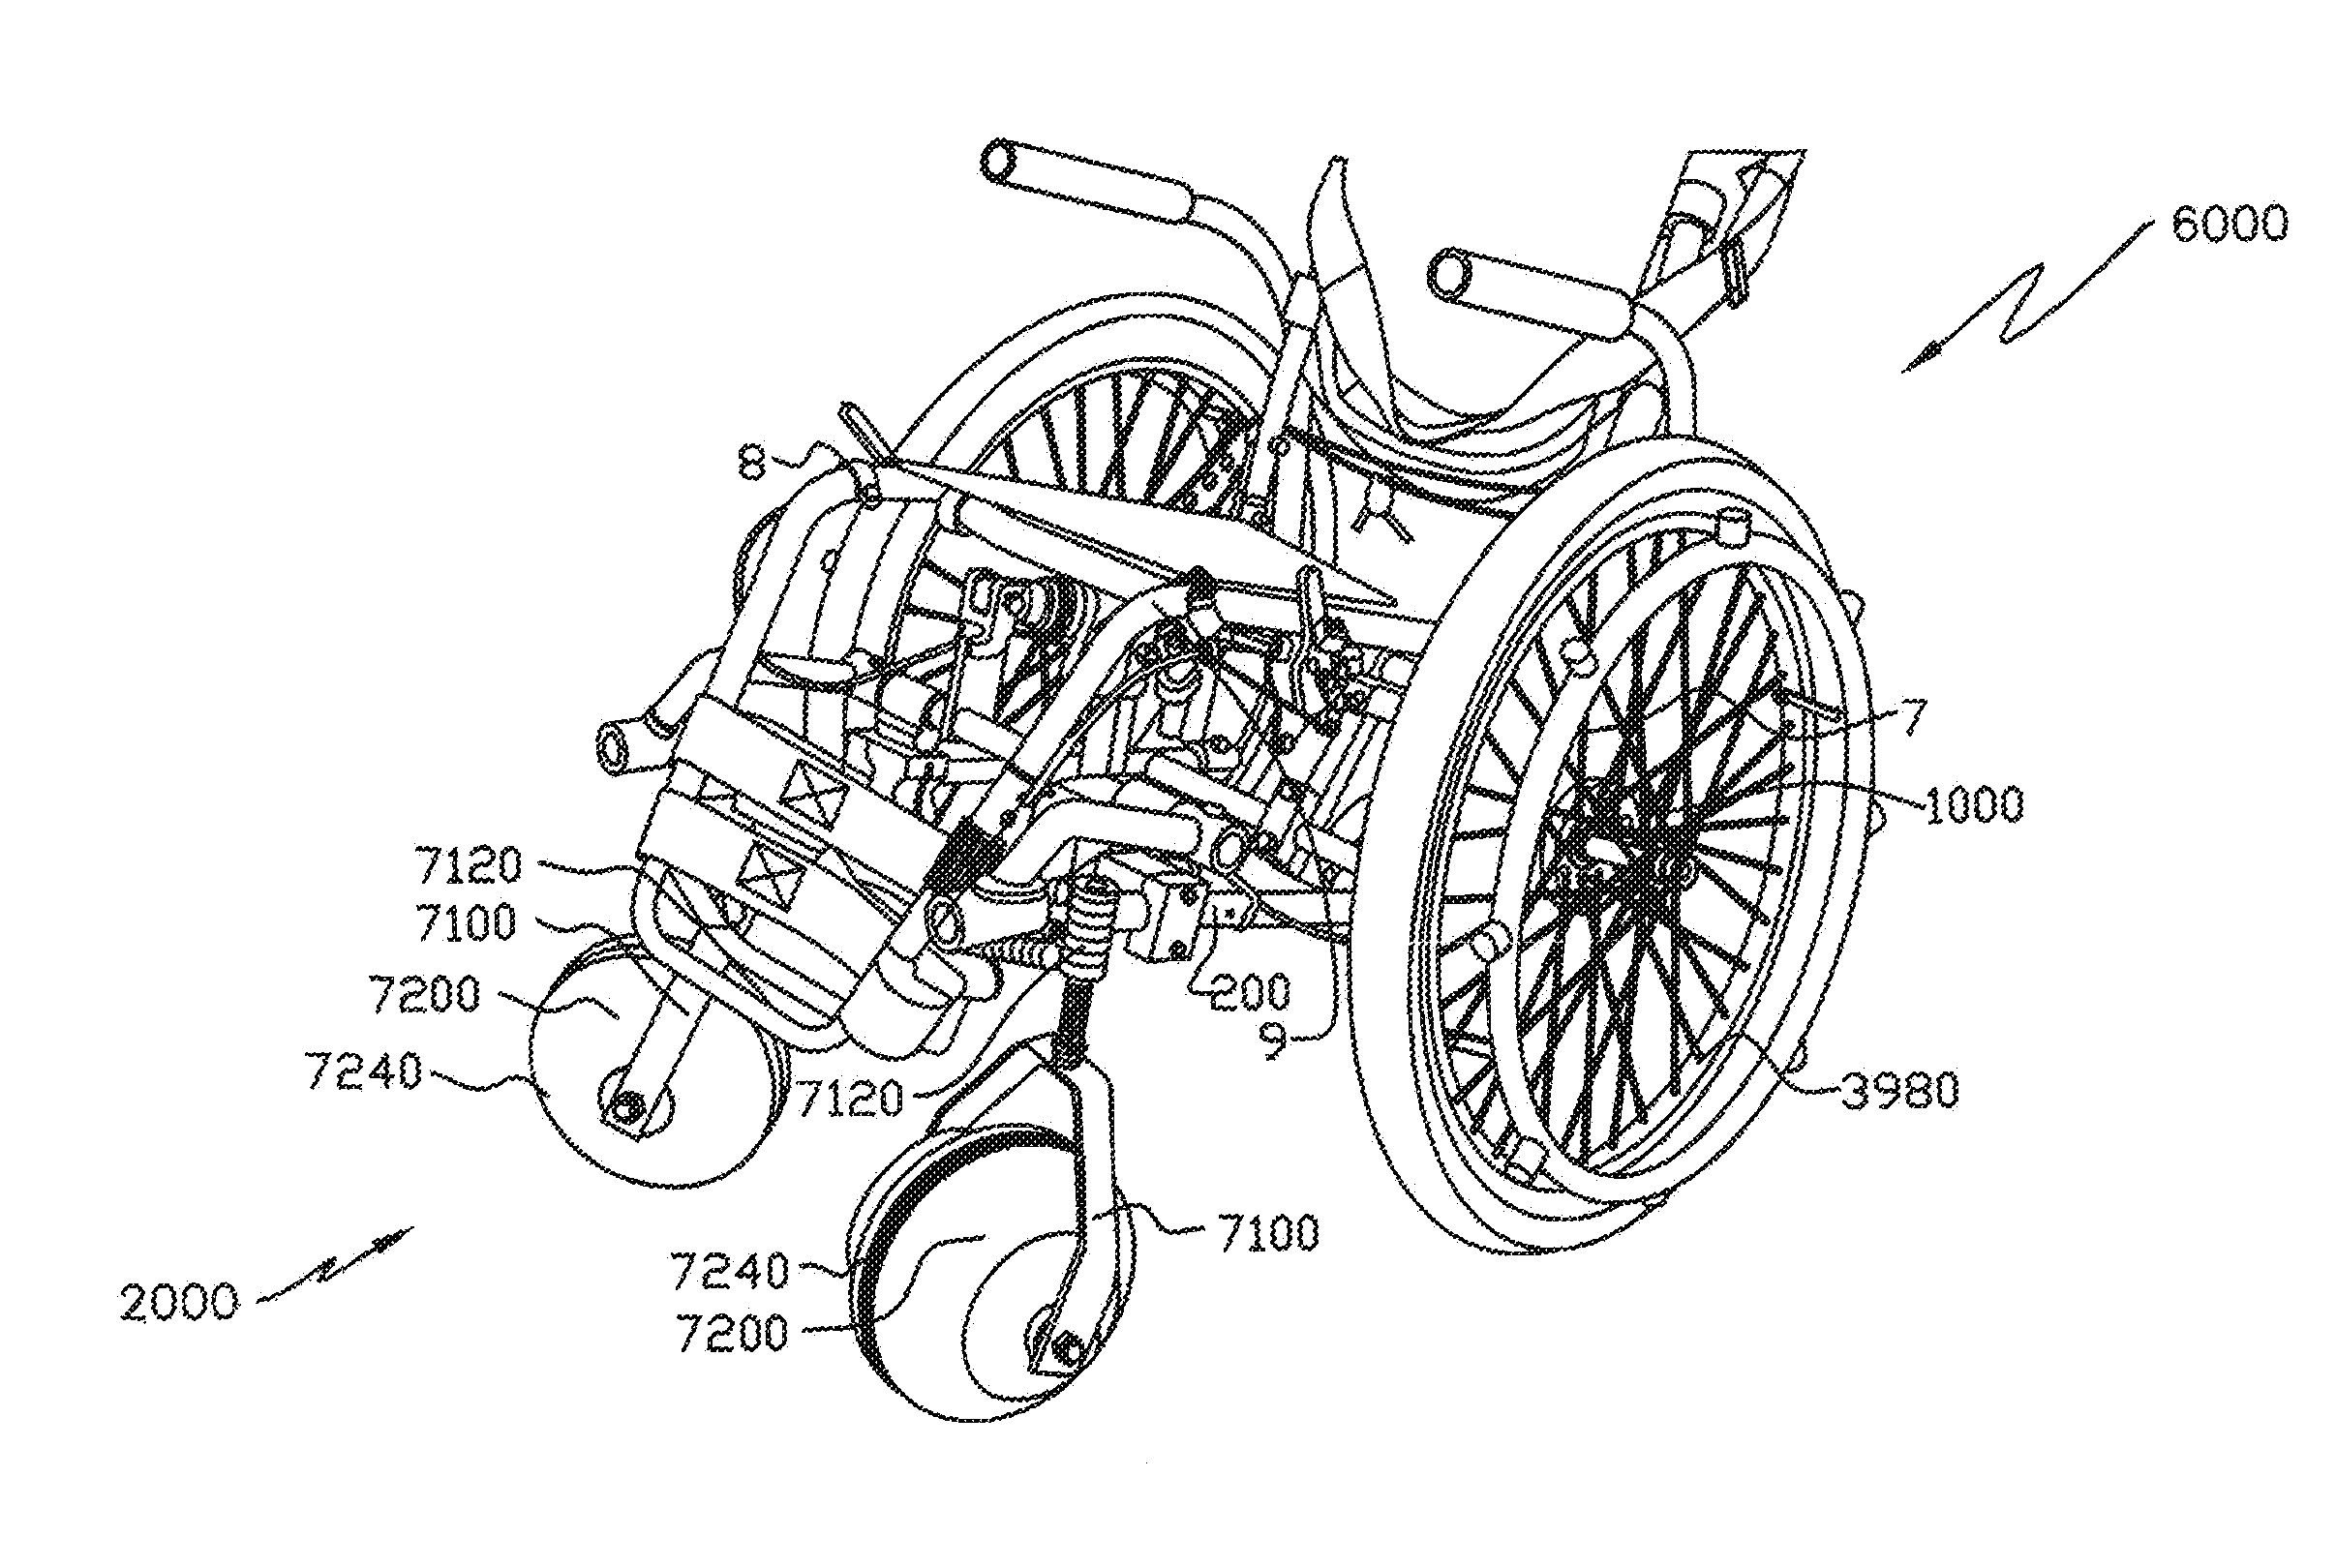 Off-road wheelchair device with suspension